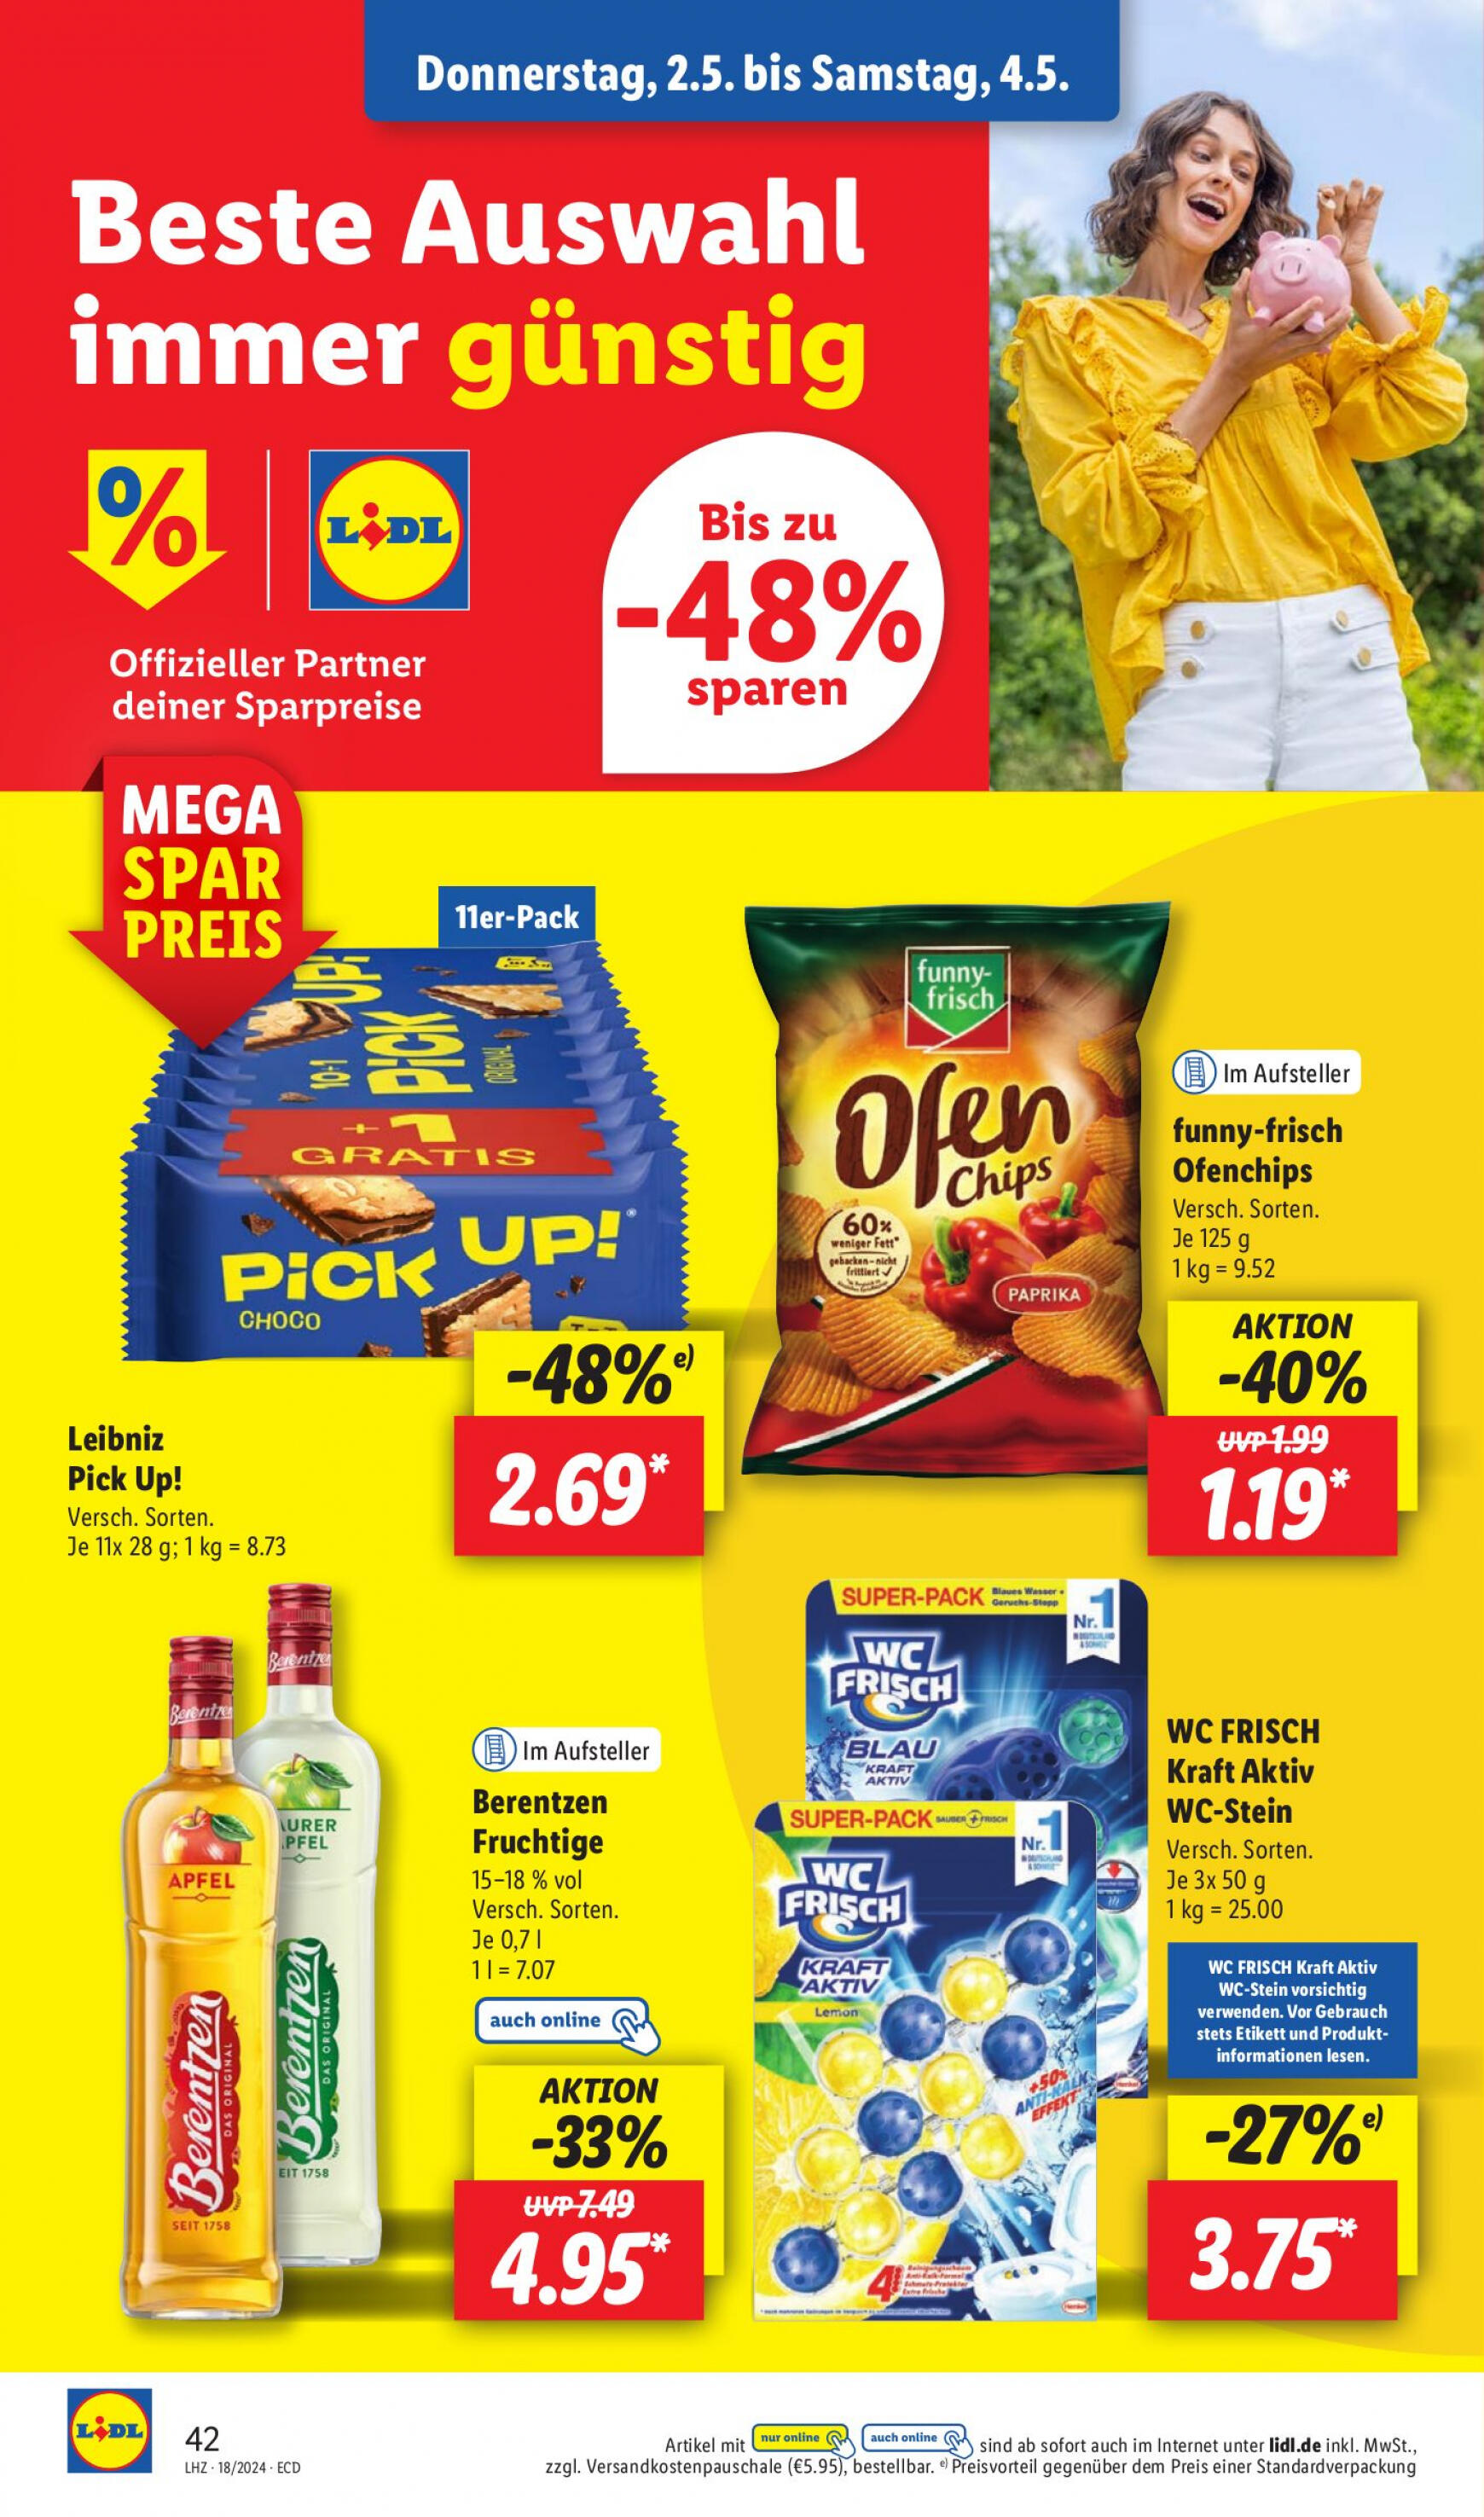 lidl - Flyer Lidl aktuell 29.04. - 04.05. - page: 52